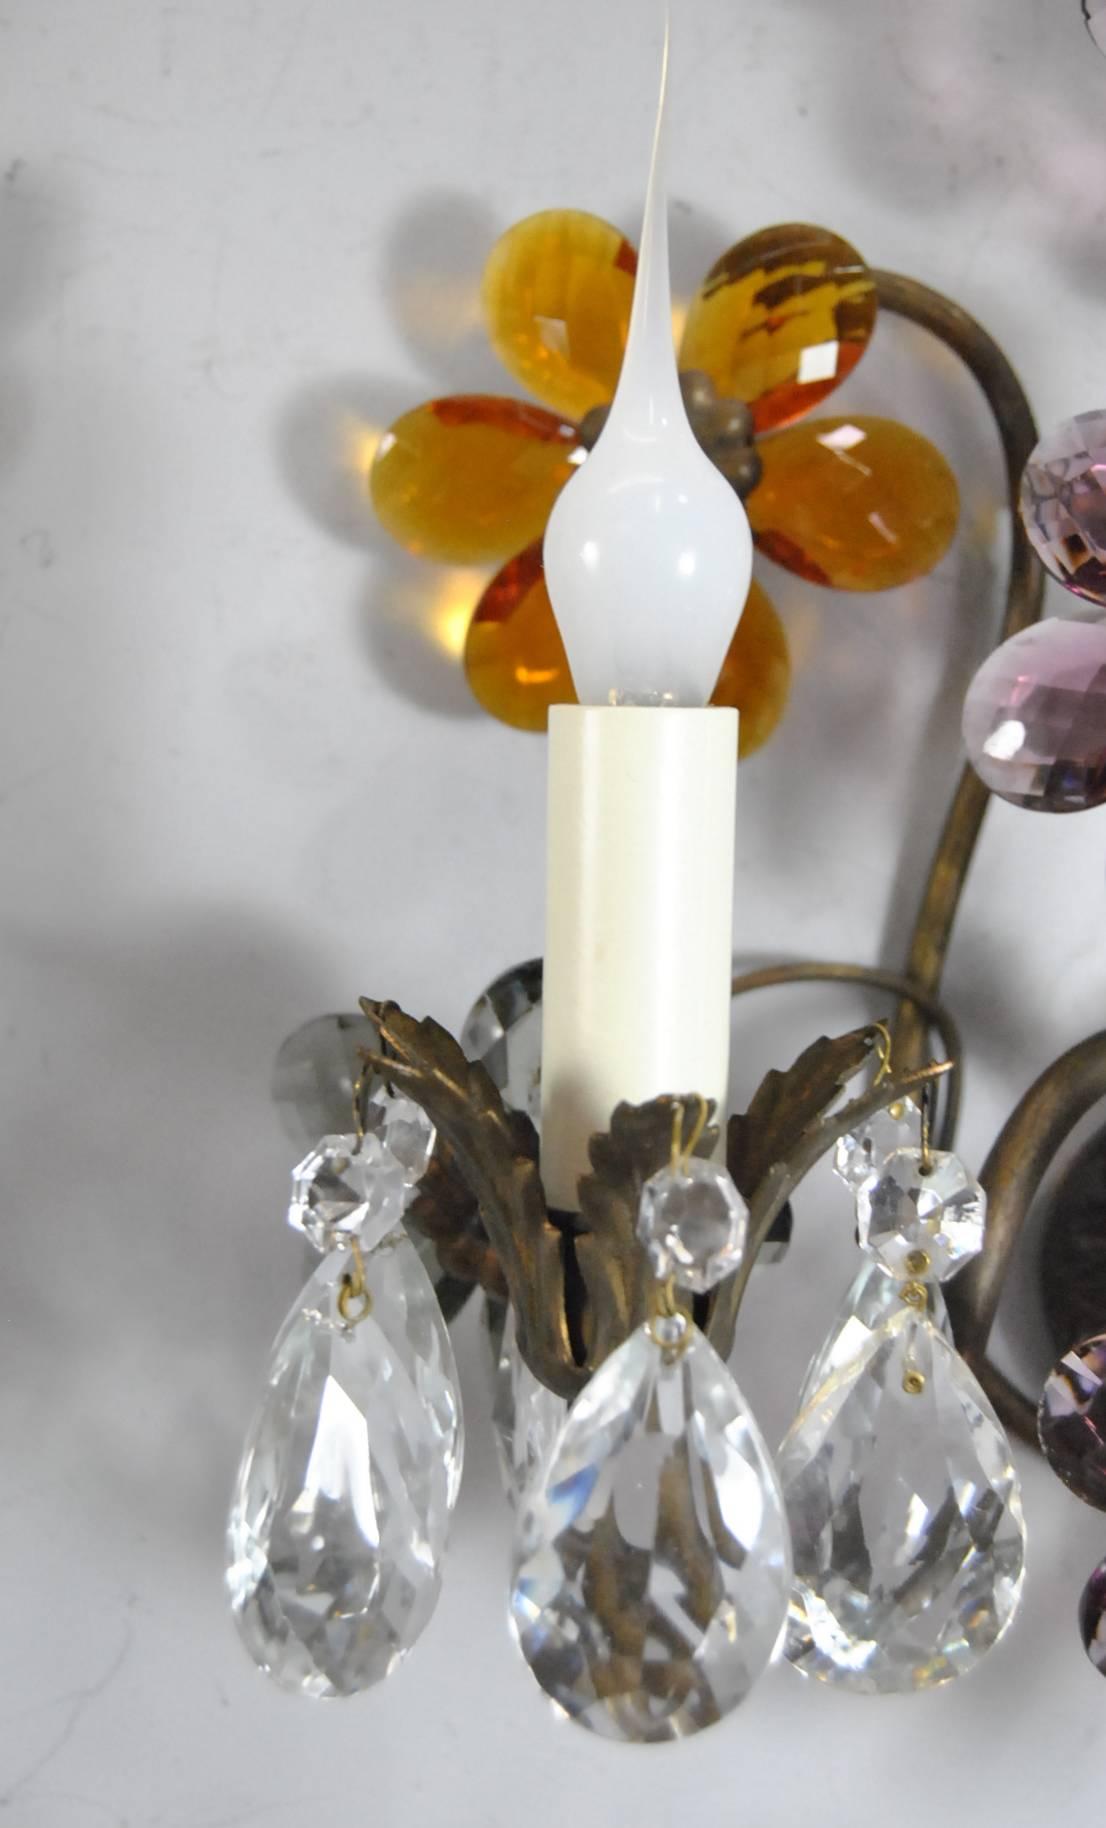 Unique antique pair of French bronze wall sconces. Beautiful floral designs in cut crystal with 12 crystal drops. Glass petals are in shades of amber, lilac and smoke grey. Body has an urn shape which holds two leaf style arms. Measures: 12"